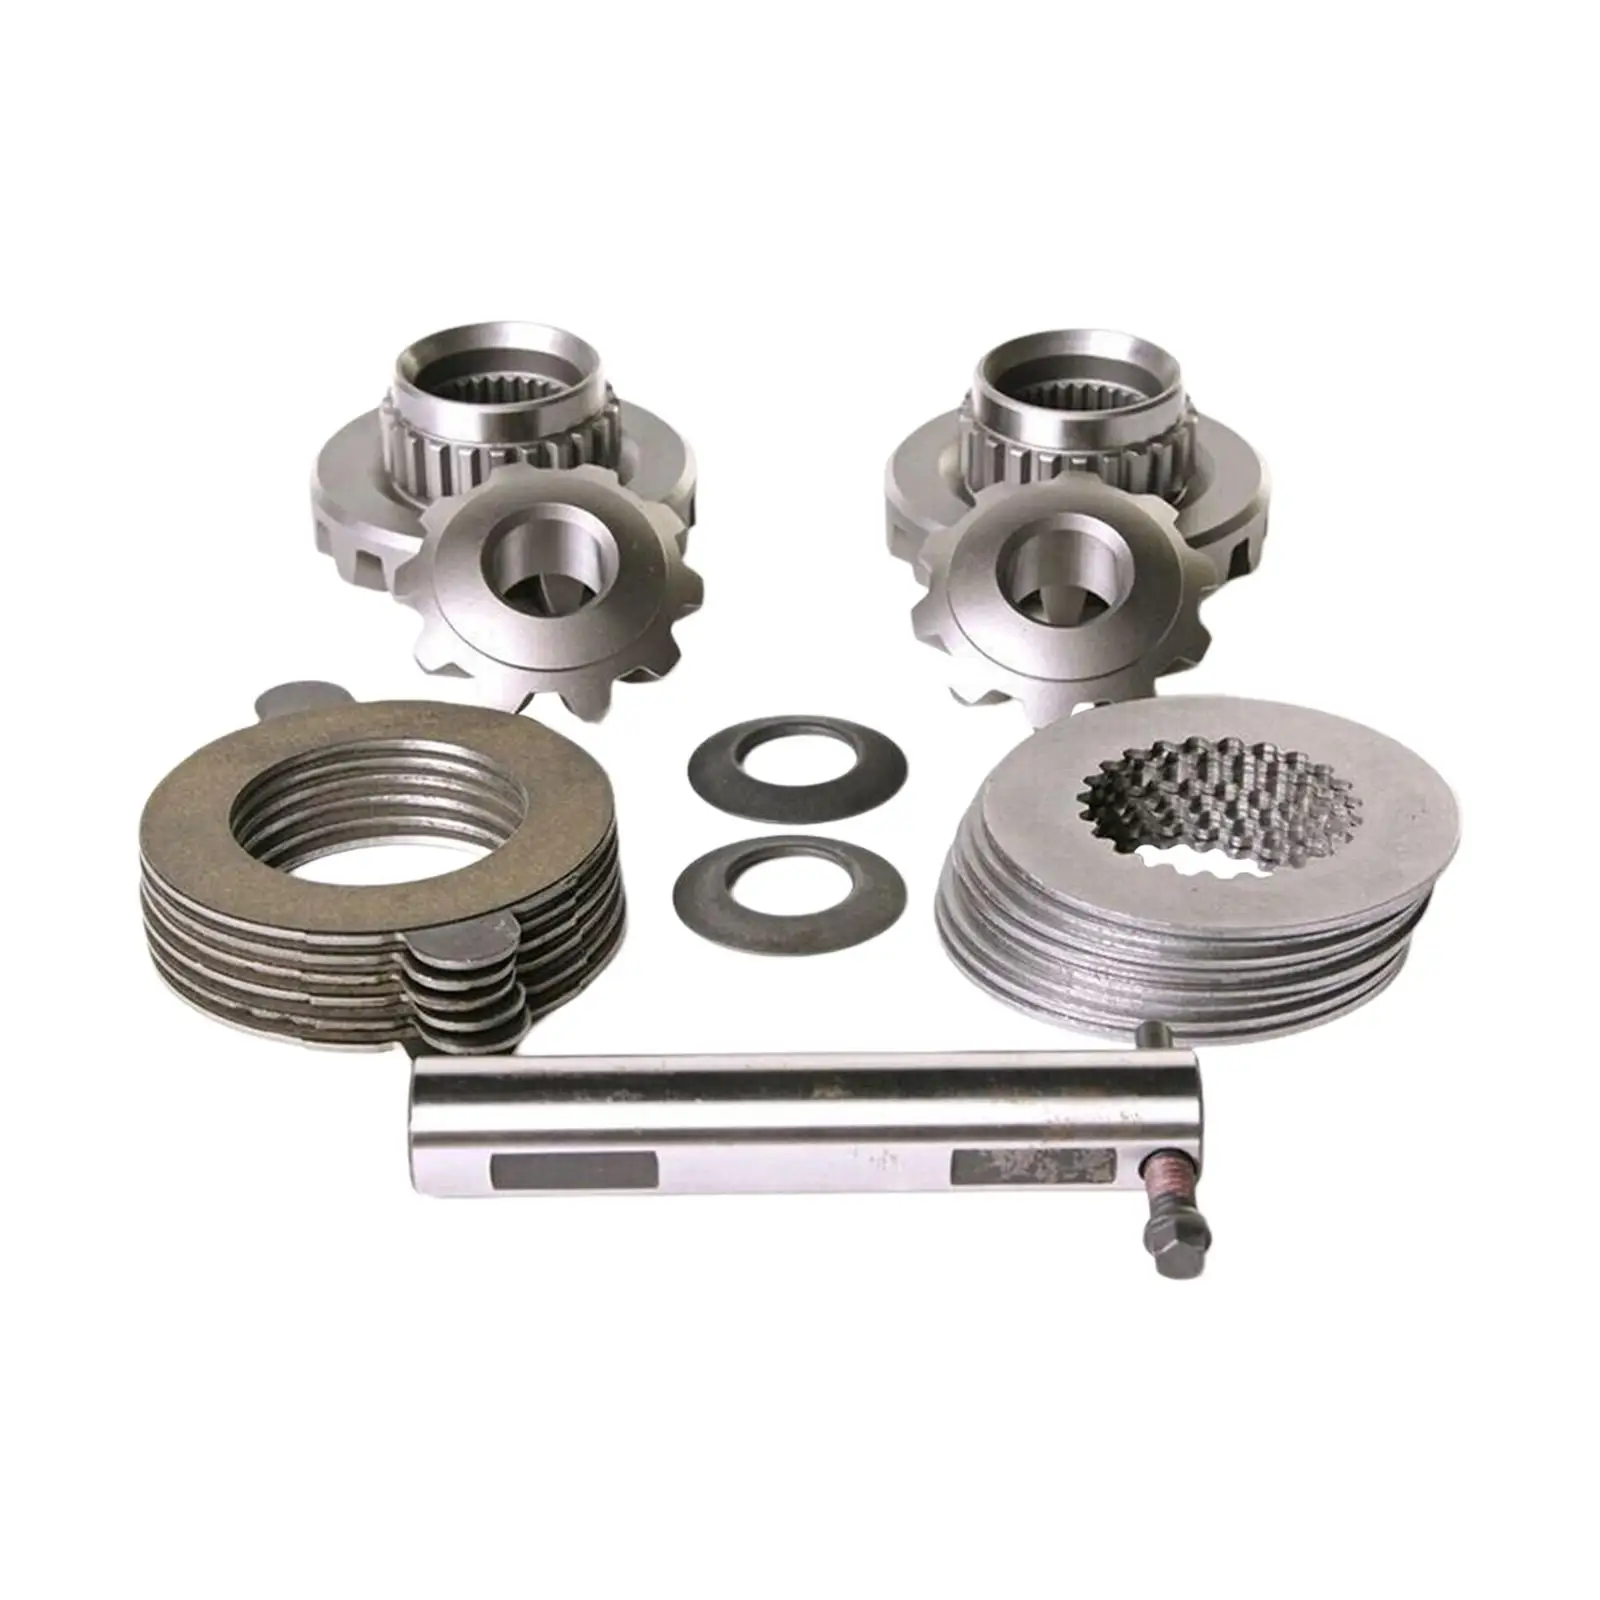 Clutch Pack Gears Kit 31 Spline F8.8cpk for Ford 8.8